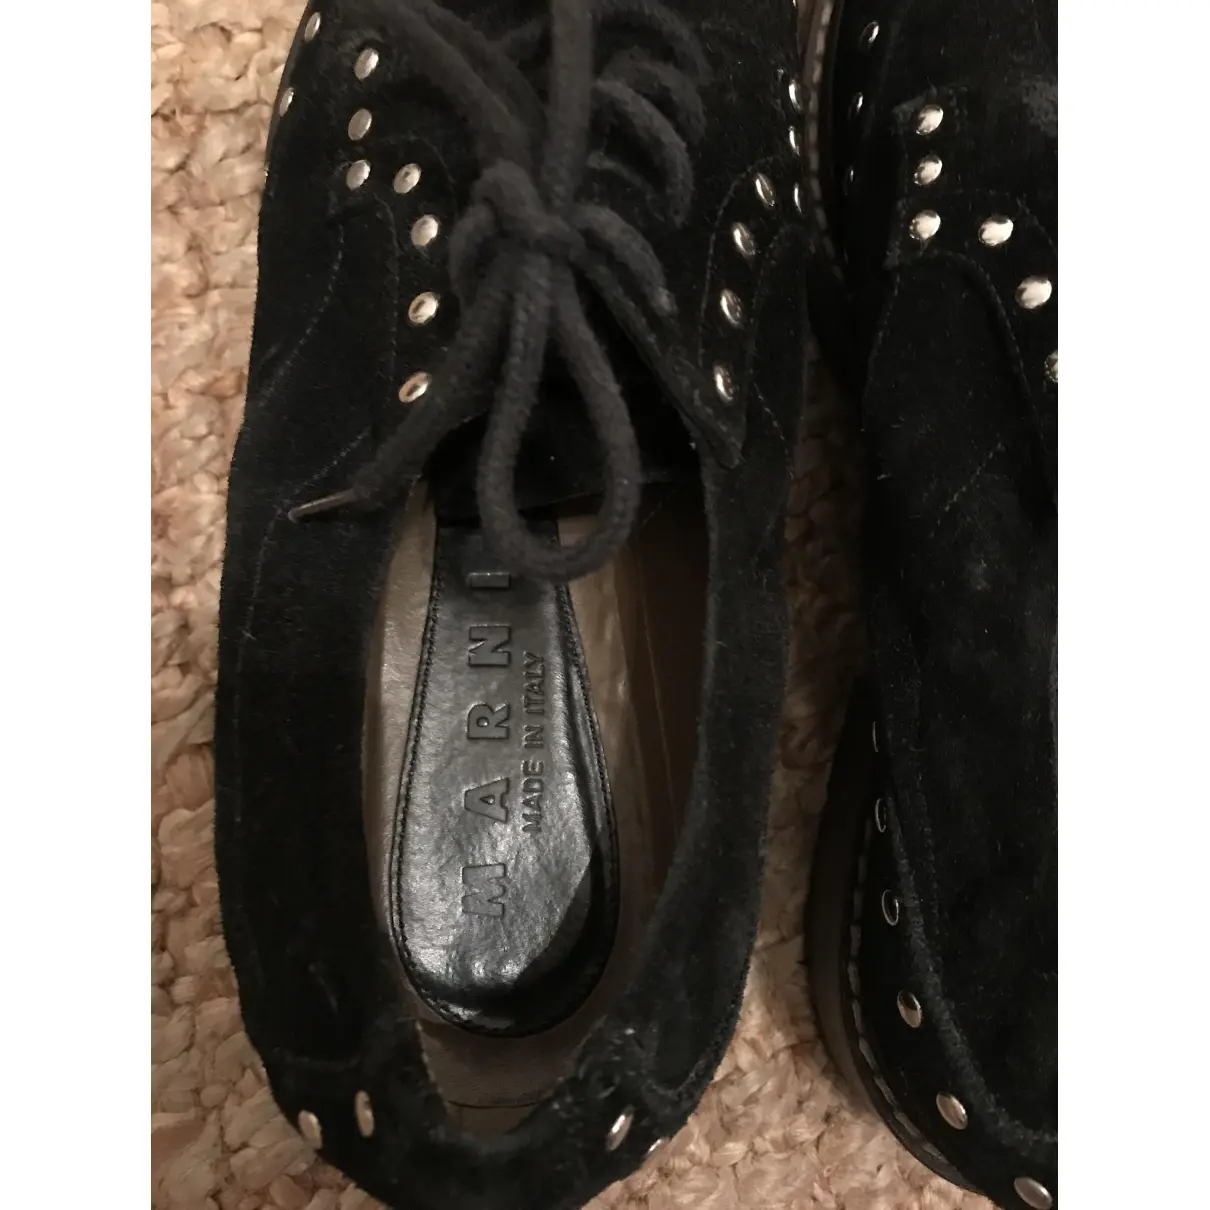 Buy Marni Lace ups online